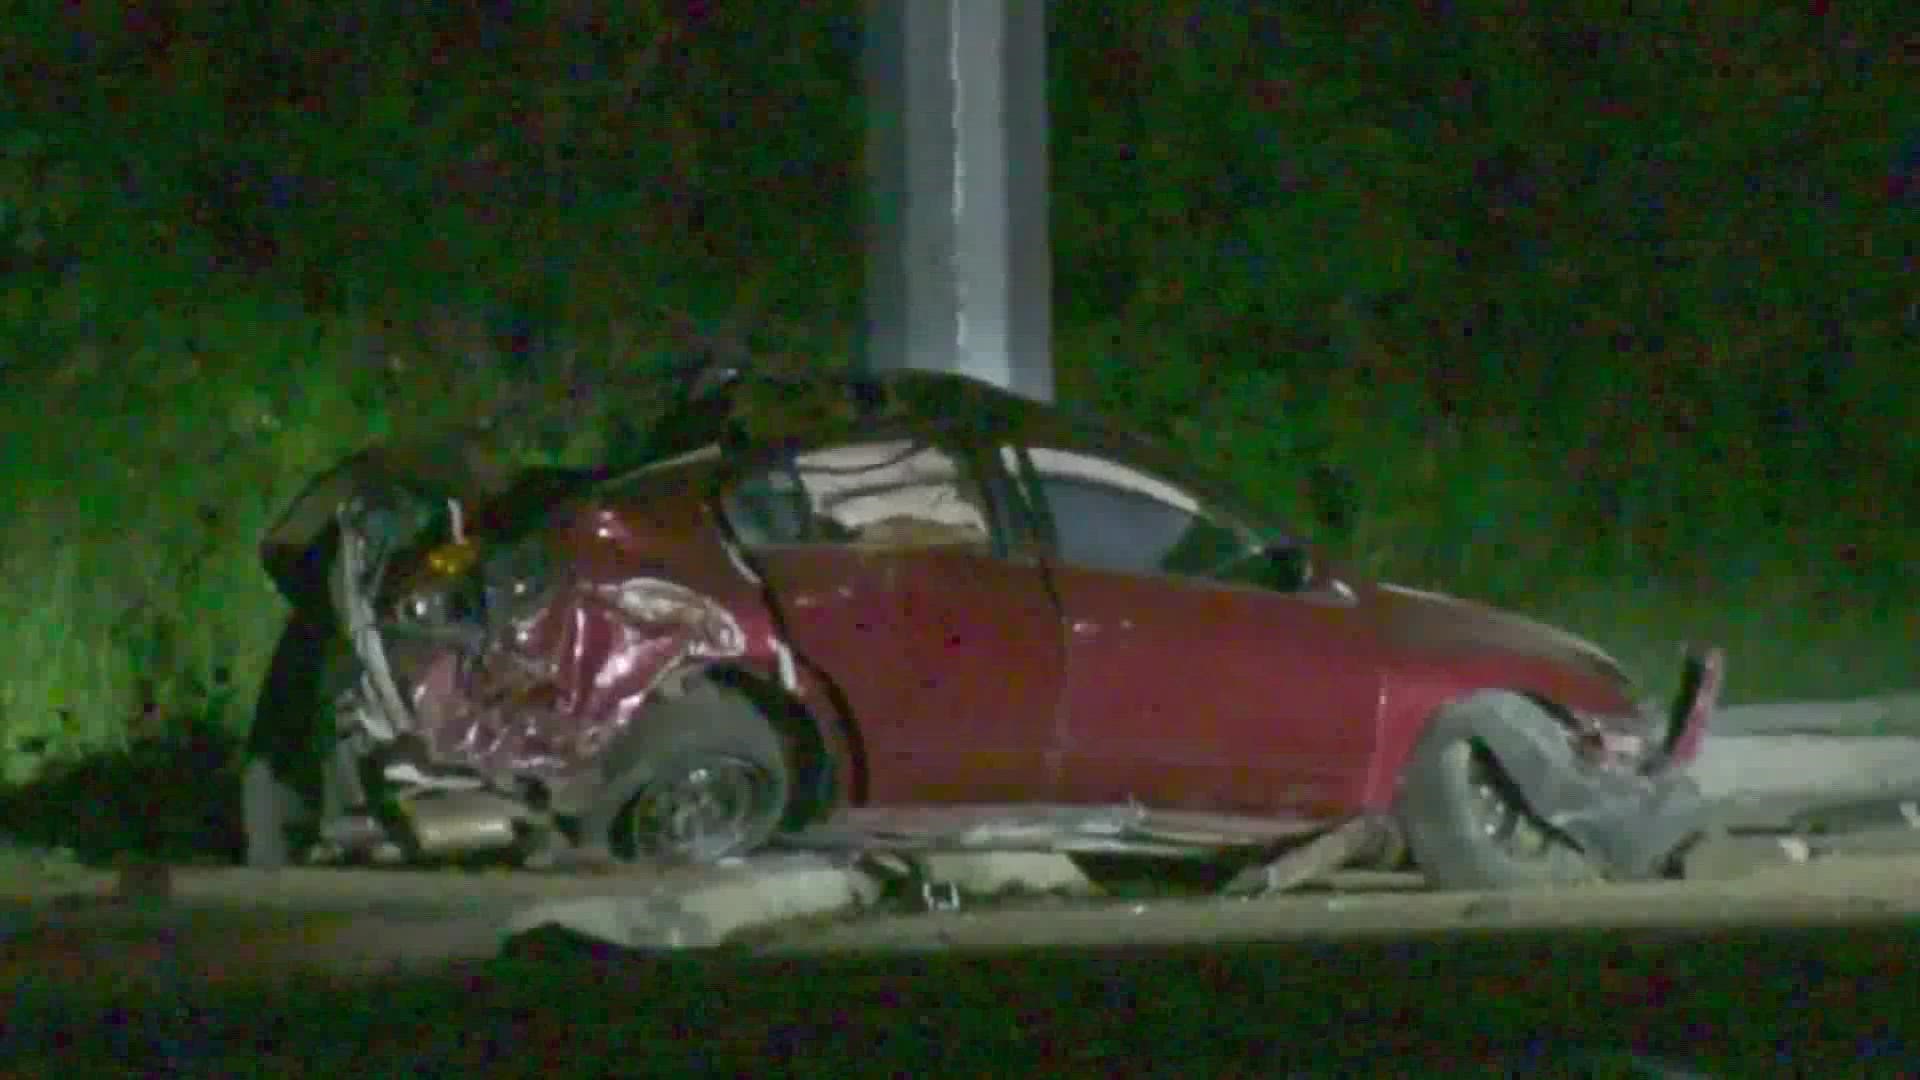 A high-speed chase ended in a deadly crash in north Houston early Tuesday, according to police.